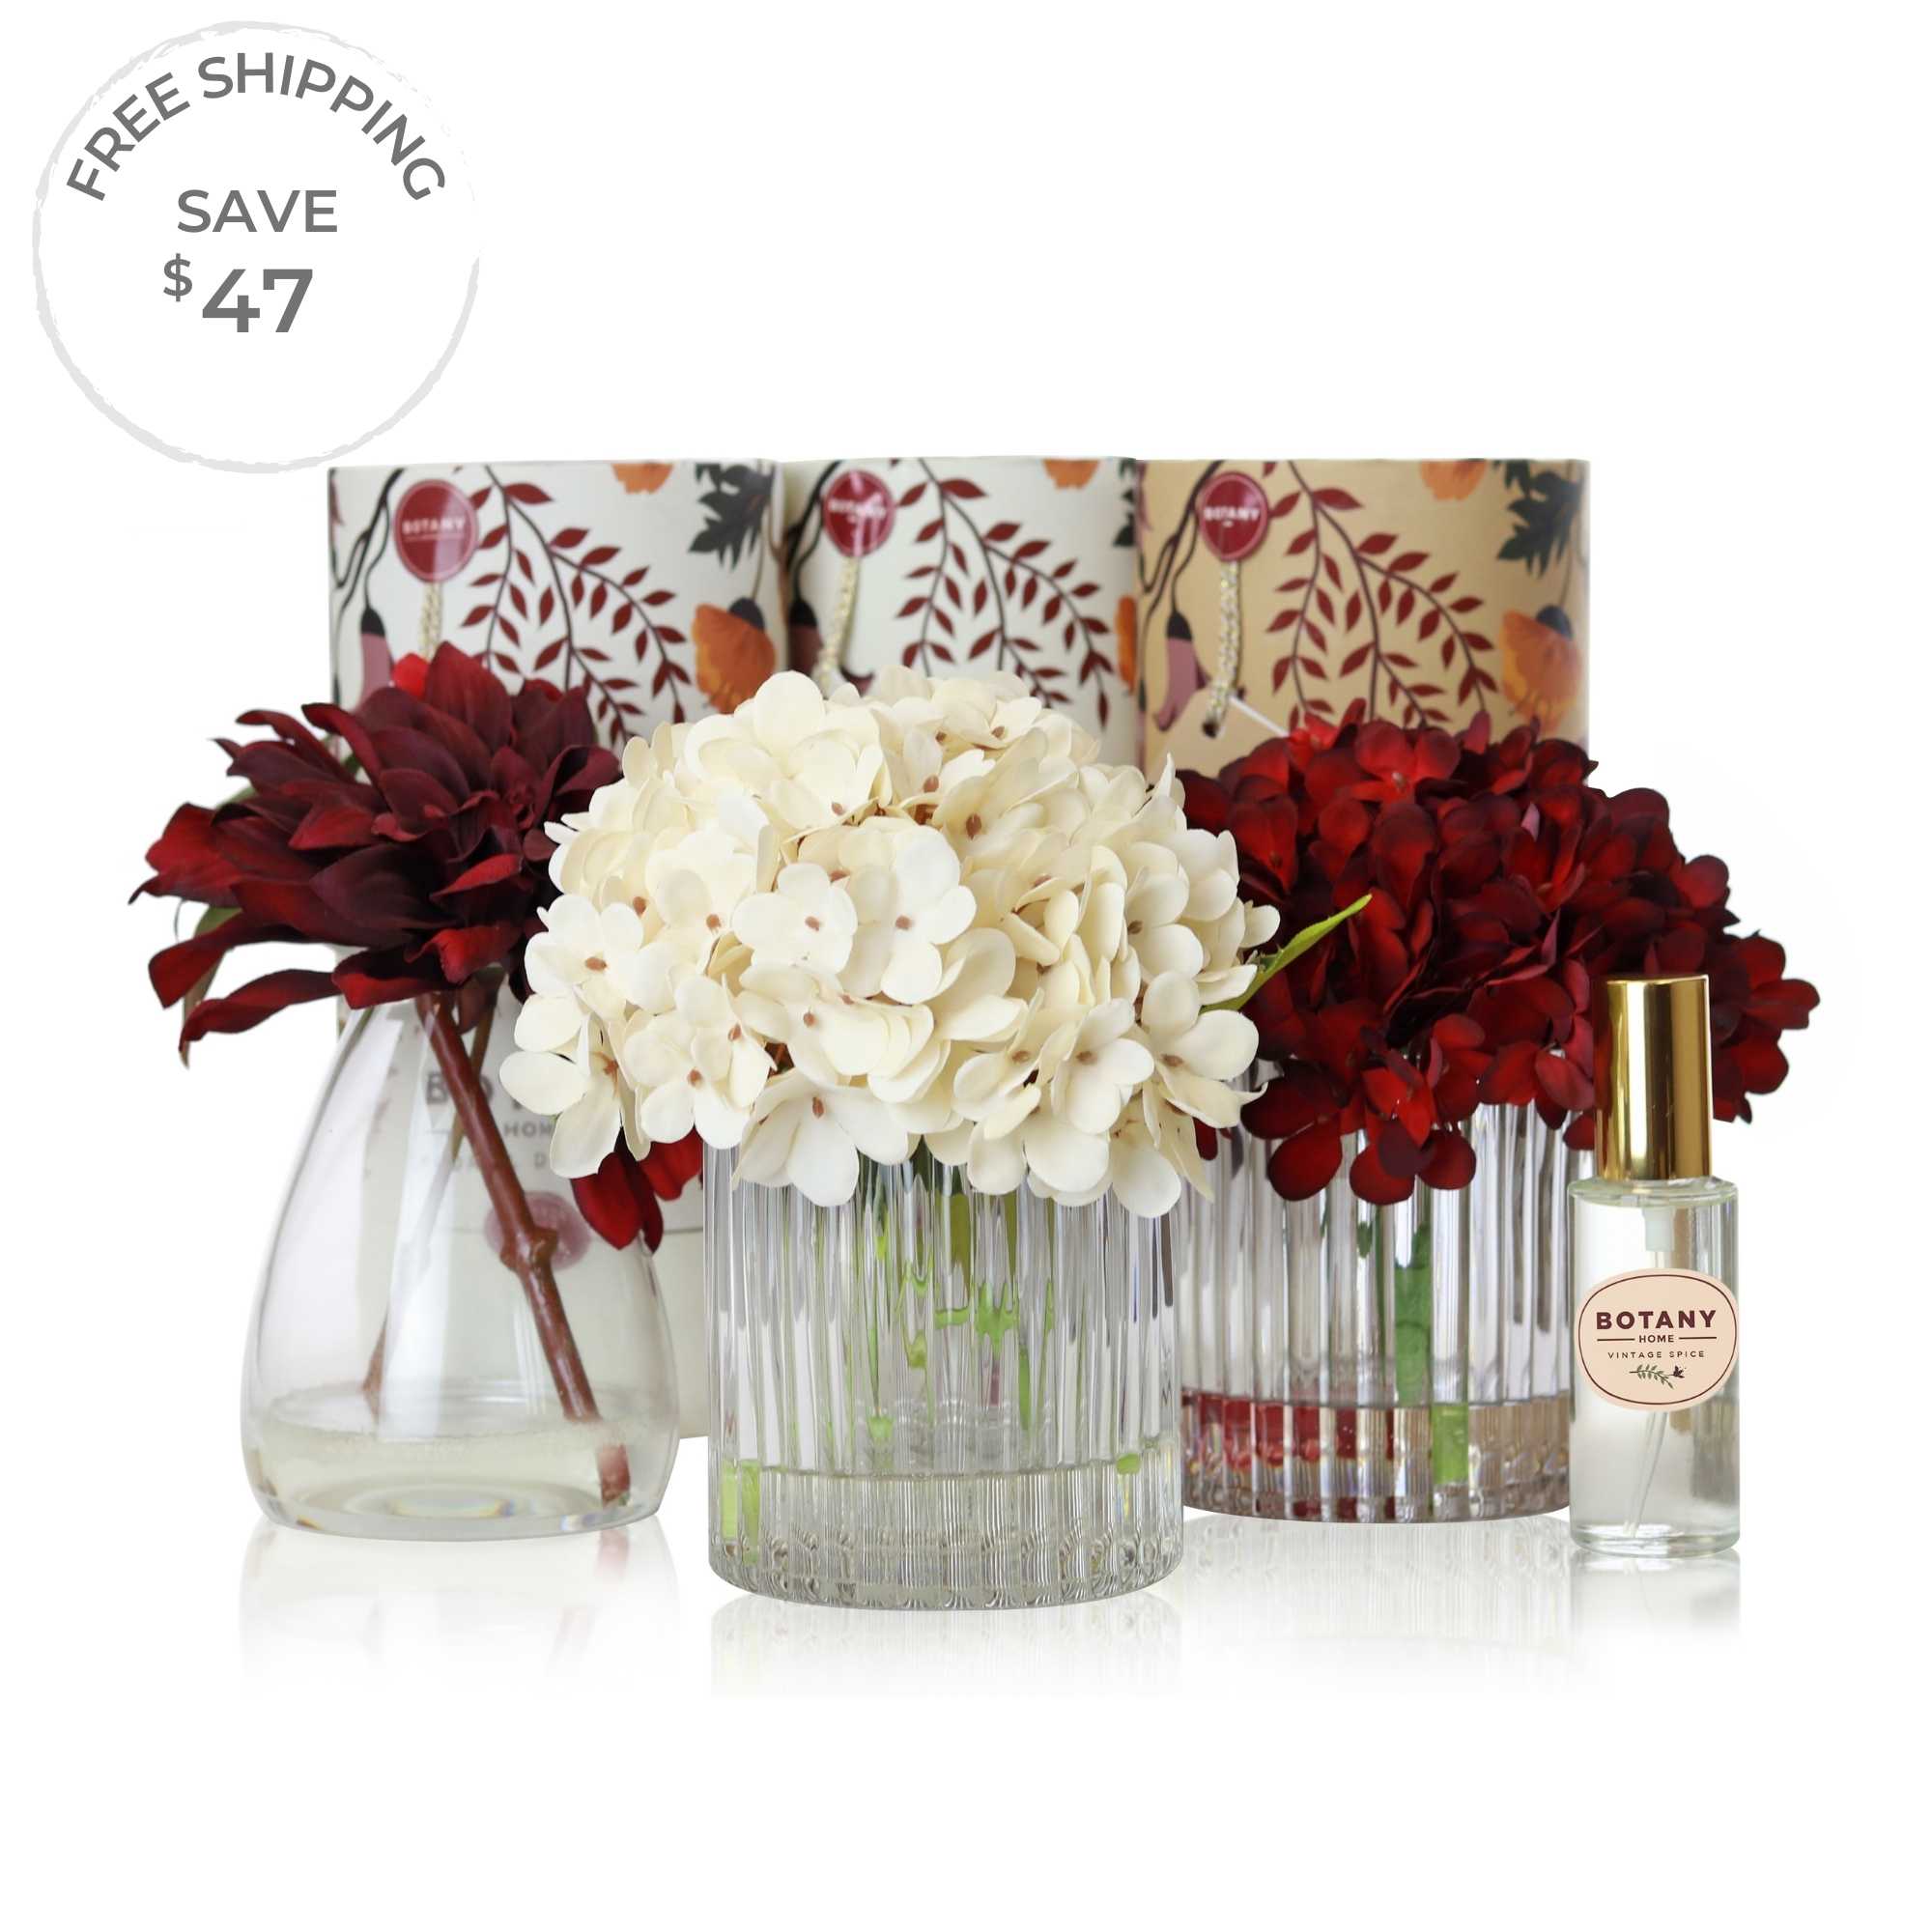 A set of 3 artificial flower arrangements with accompanying floral scent sprays sold as a set of 3